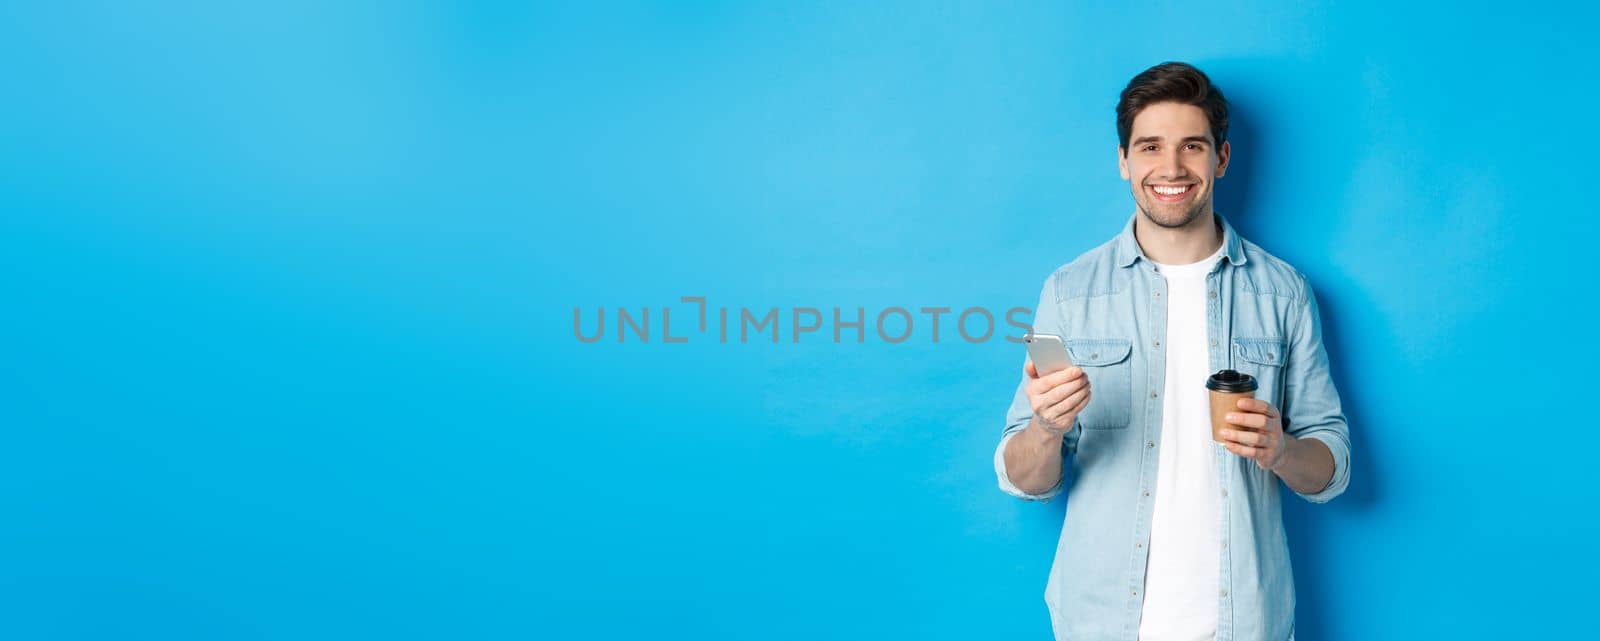 Young modern man drinking coffee and using mobile phone, smiling at camera, standing over blue background.